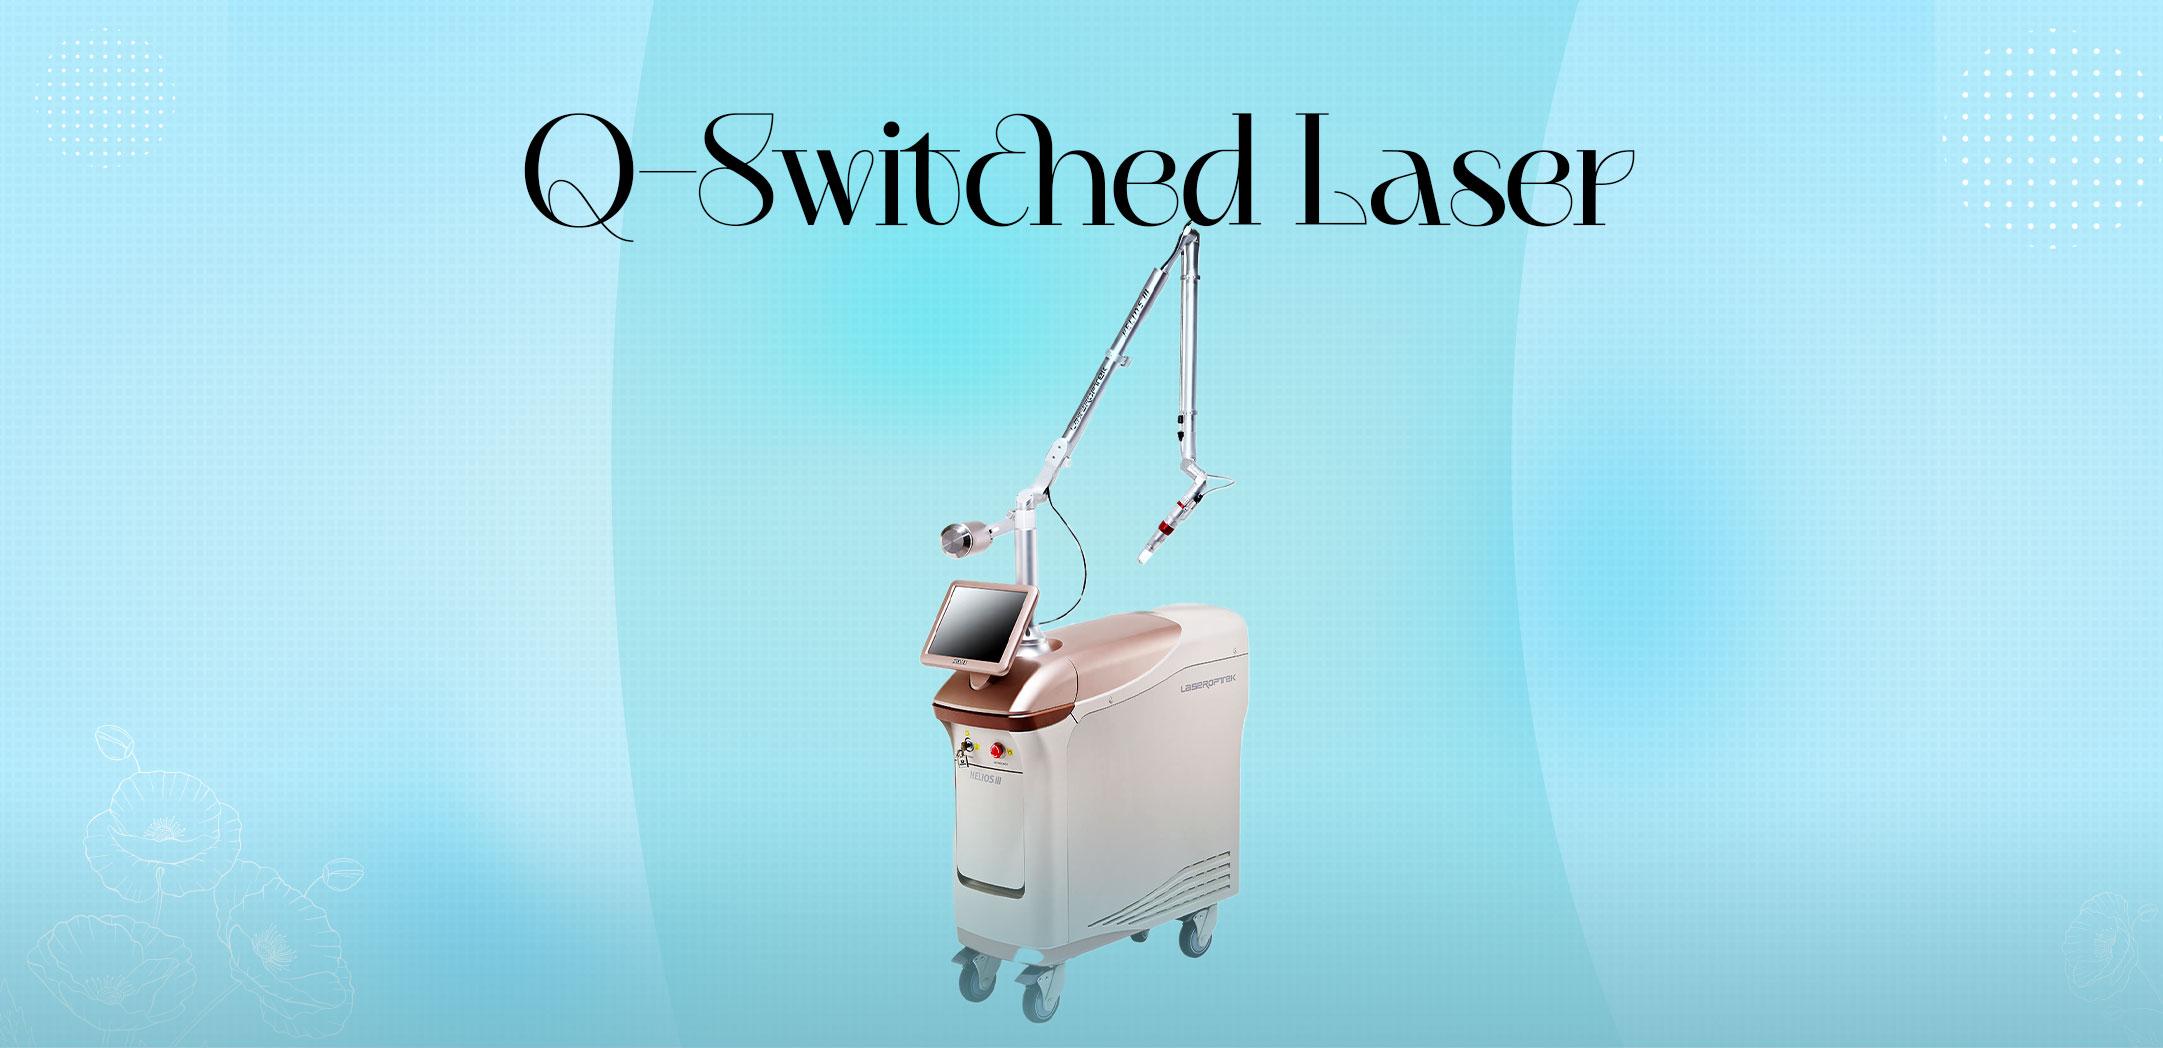 Q-switched Laser